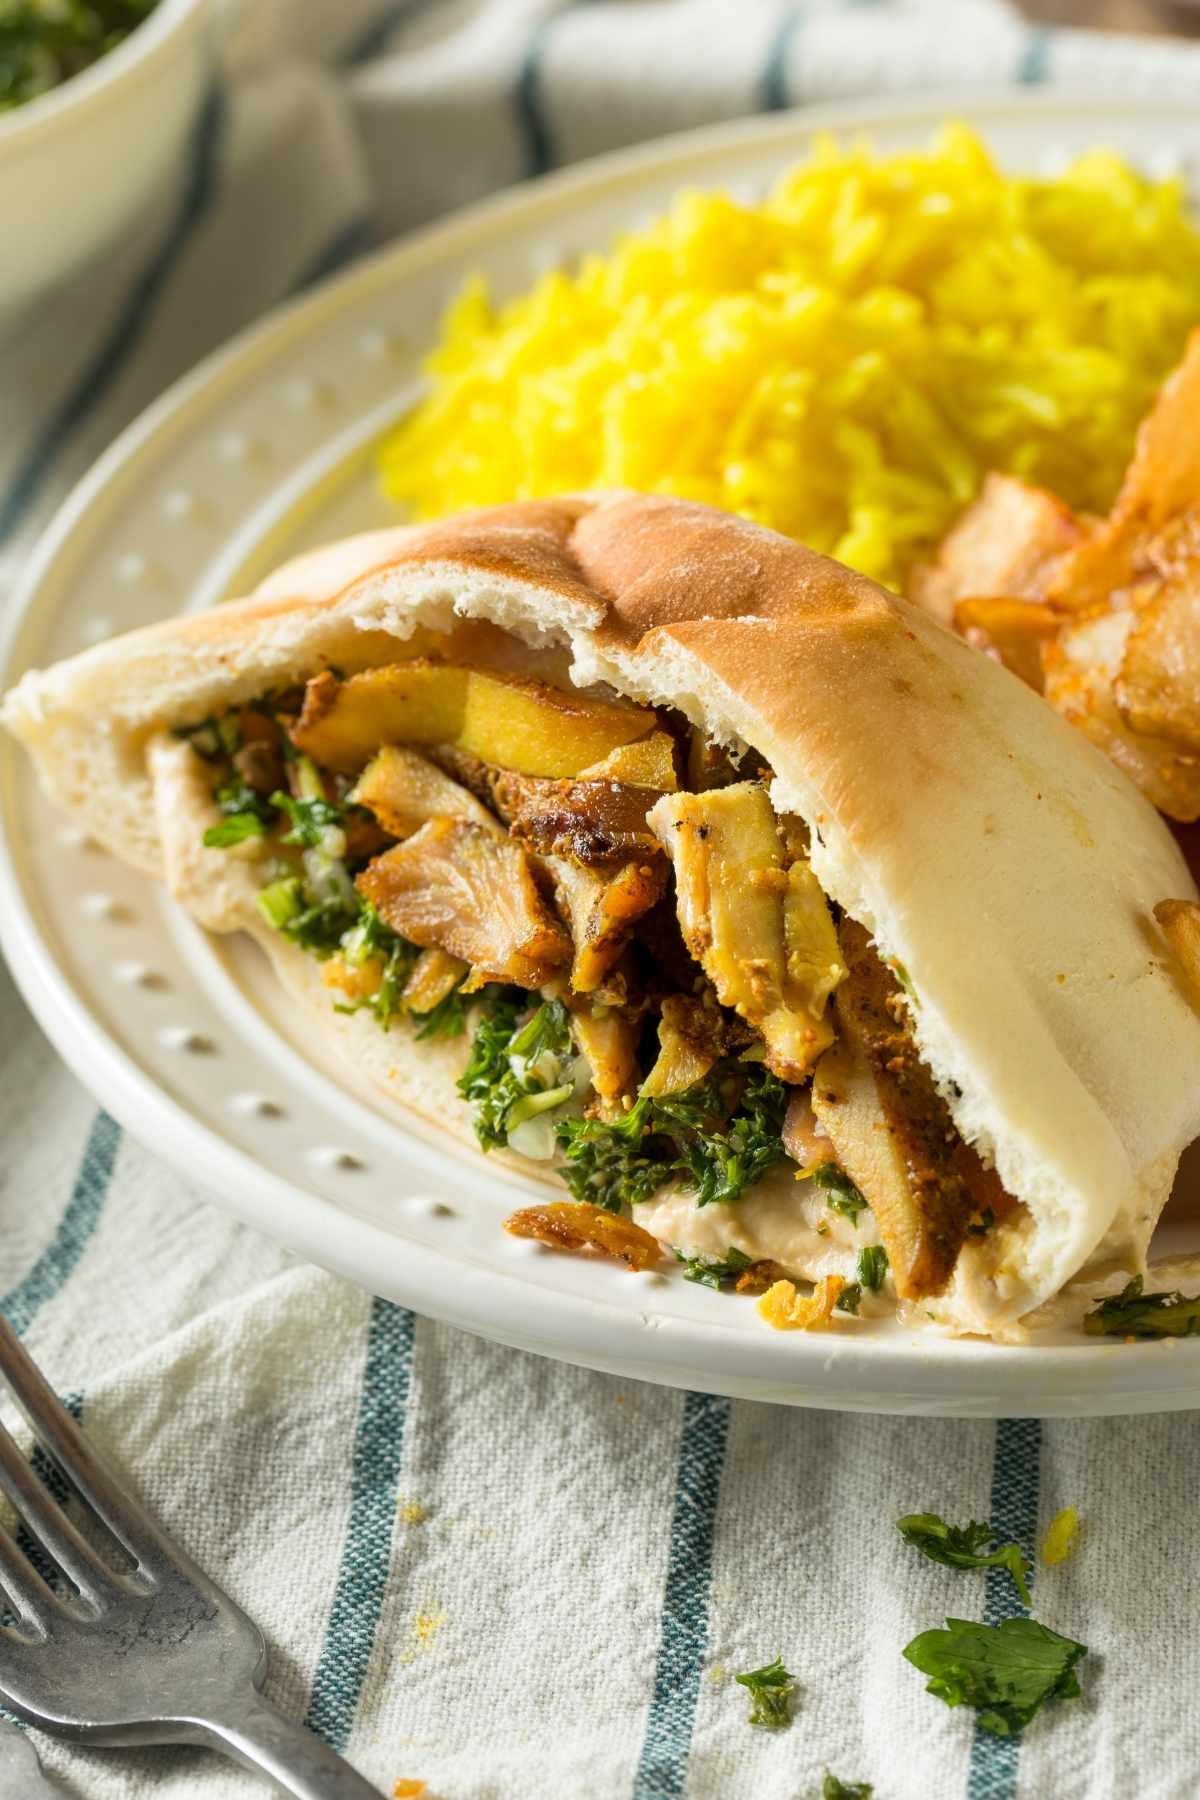 Shawarma or Gyro? Which is your favorite? Is there even a difference? From finding out what shawarma is, to learning about the different types that are available, we’ve included everything you need to know here! And afterwards, you’ll be craving a juicy bite for yourself!